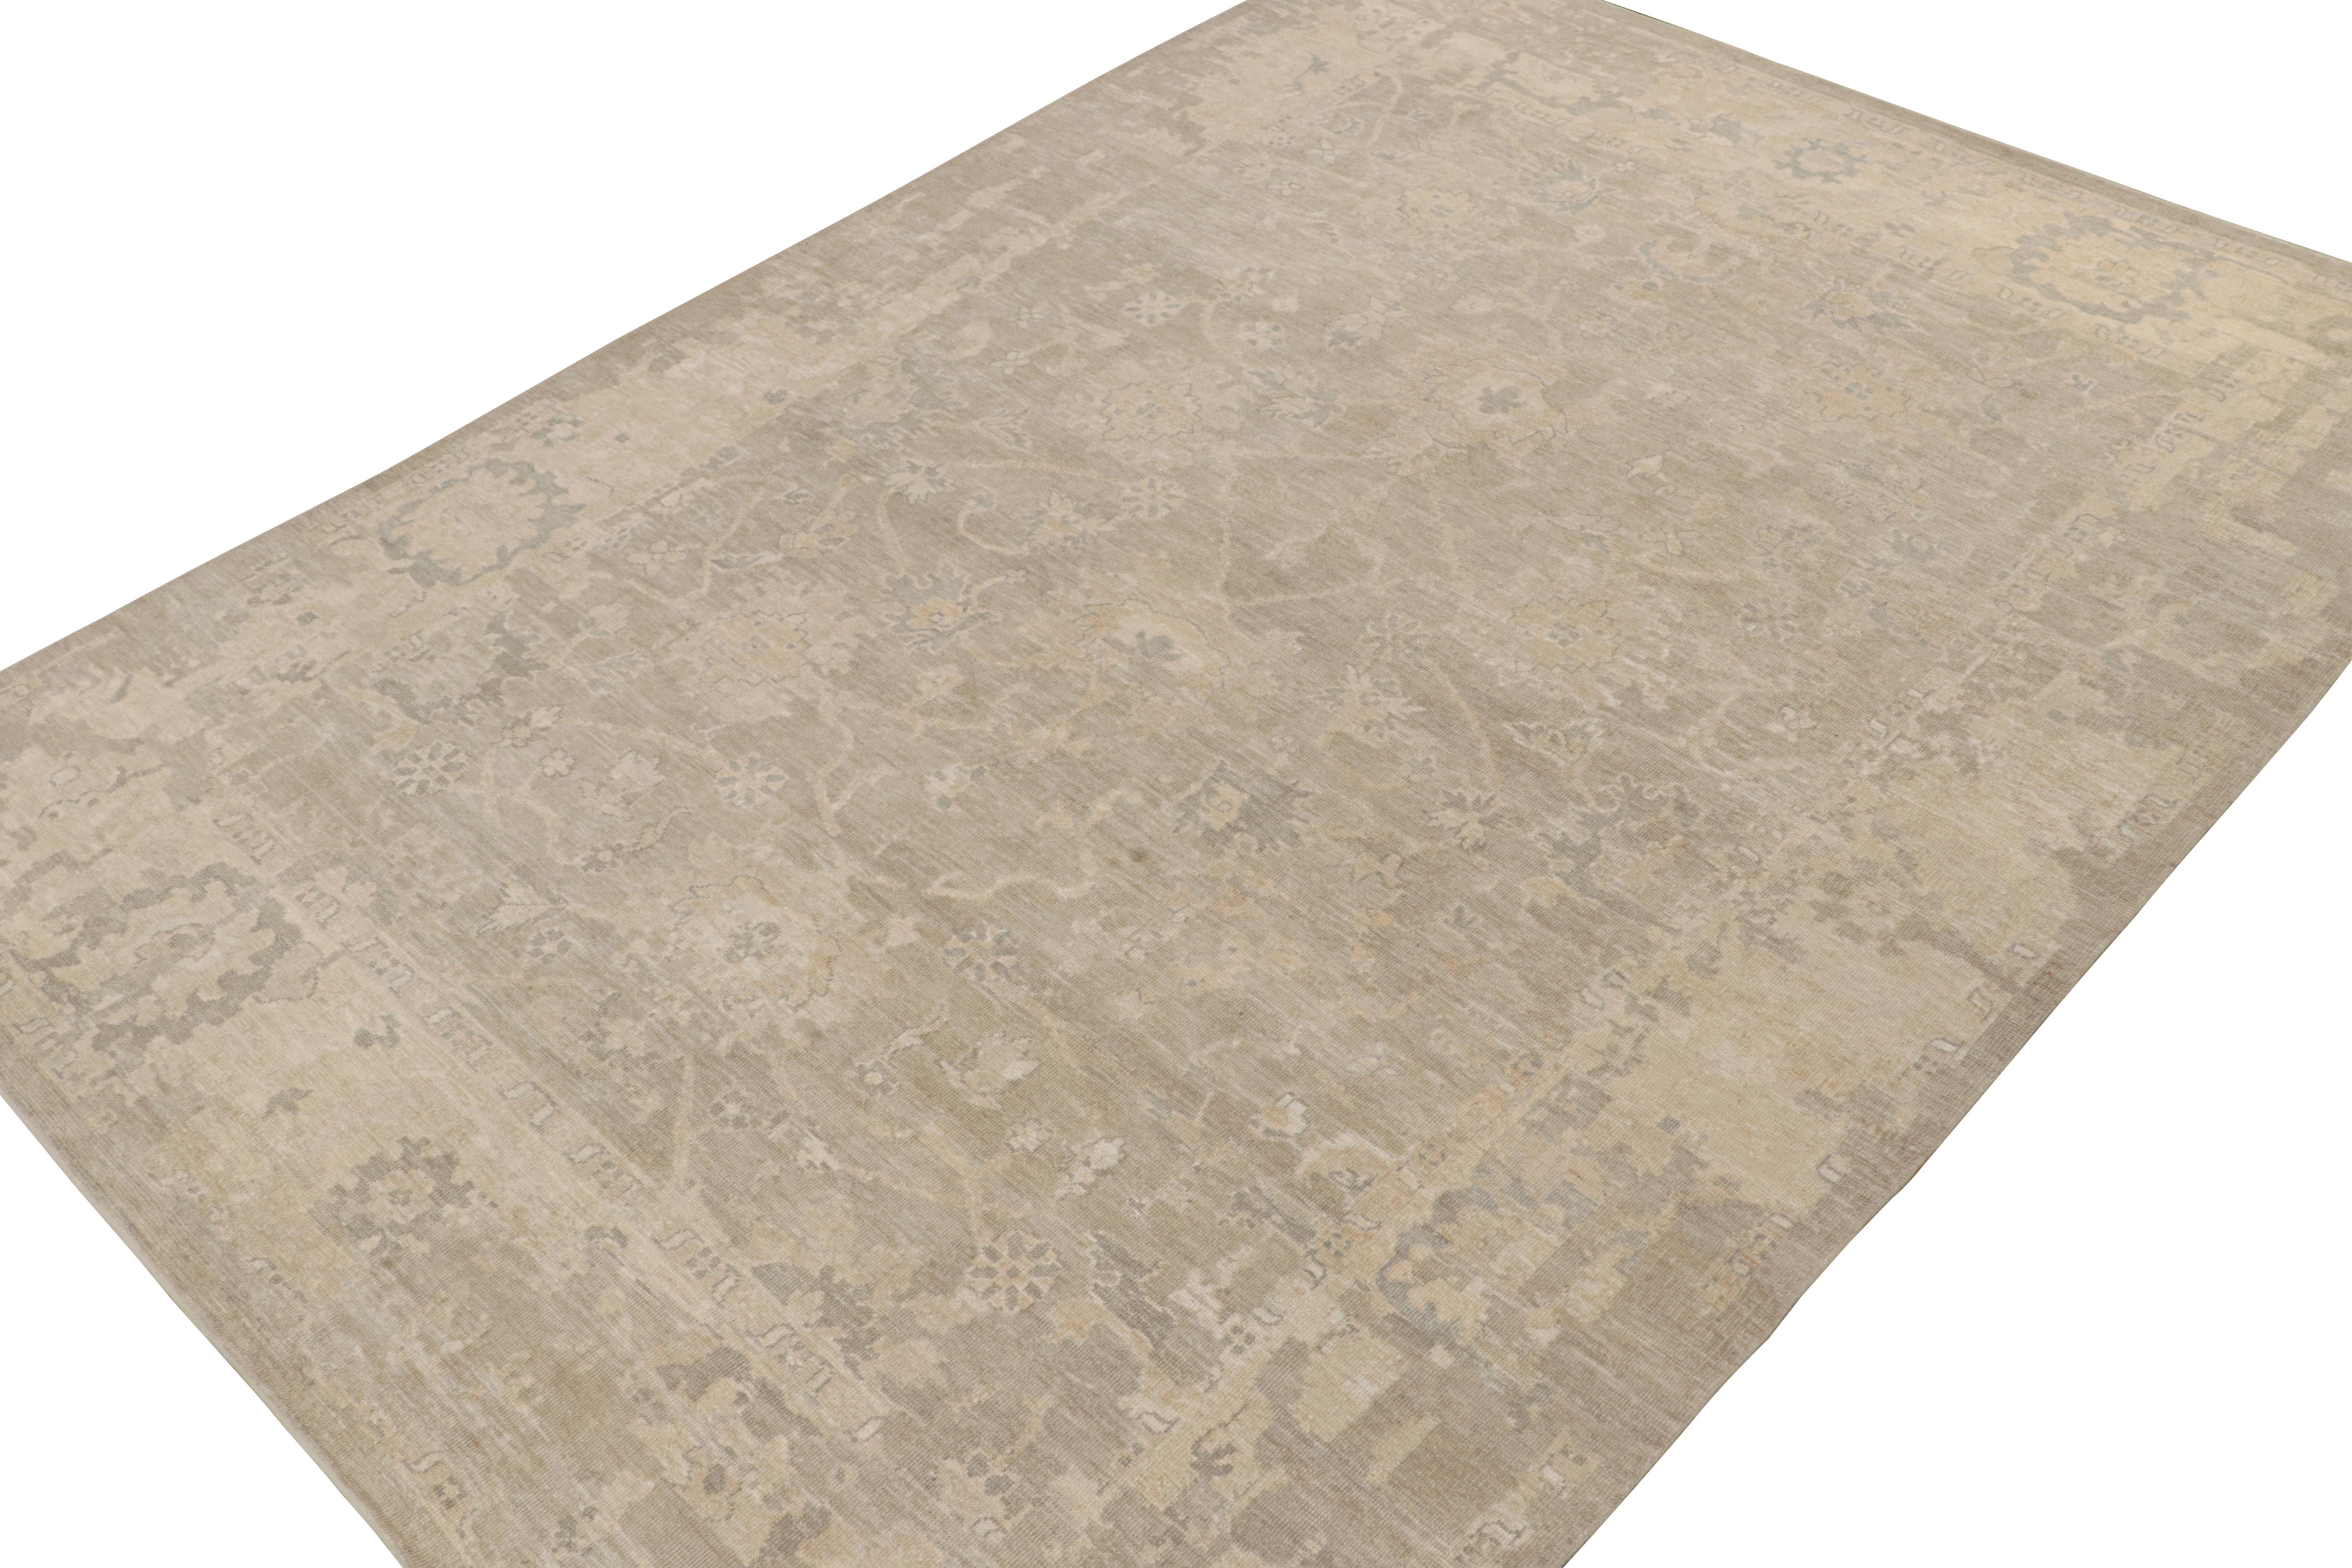 This 10x14 rug from the Modern Classics Collection by Rug & Kilim is from a new line inspired by antique Oushak rugs. Hand-knotted in silk, its design enjoys beige and silver-gray floral patterns with ivory accents and neutral tones. 

On the